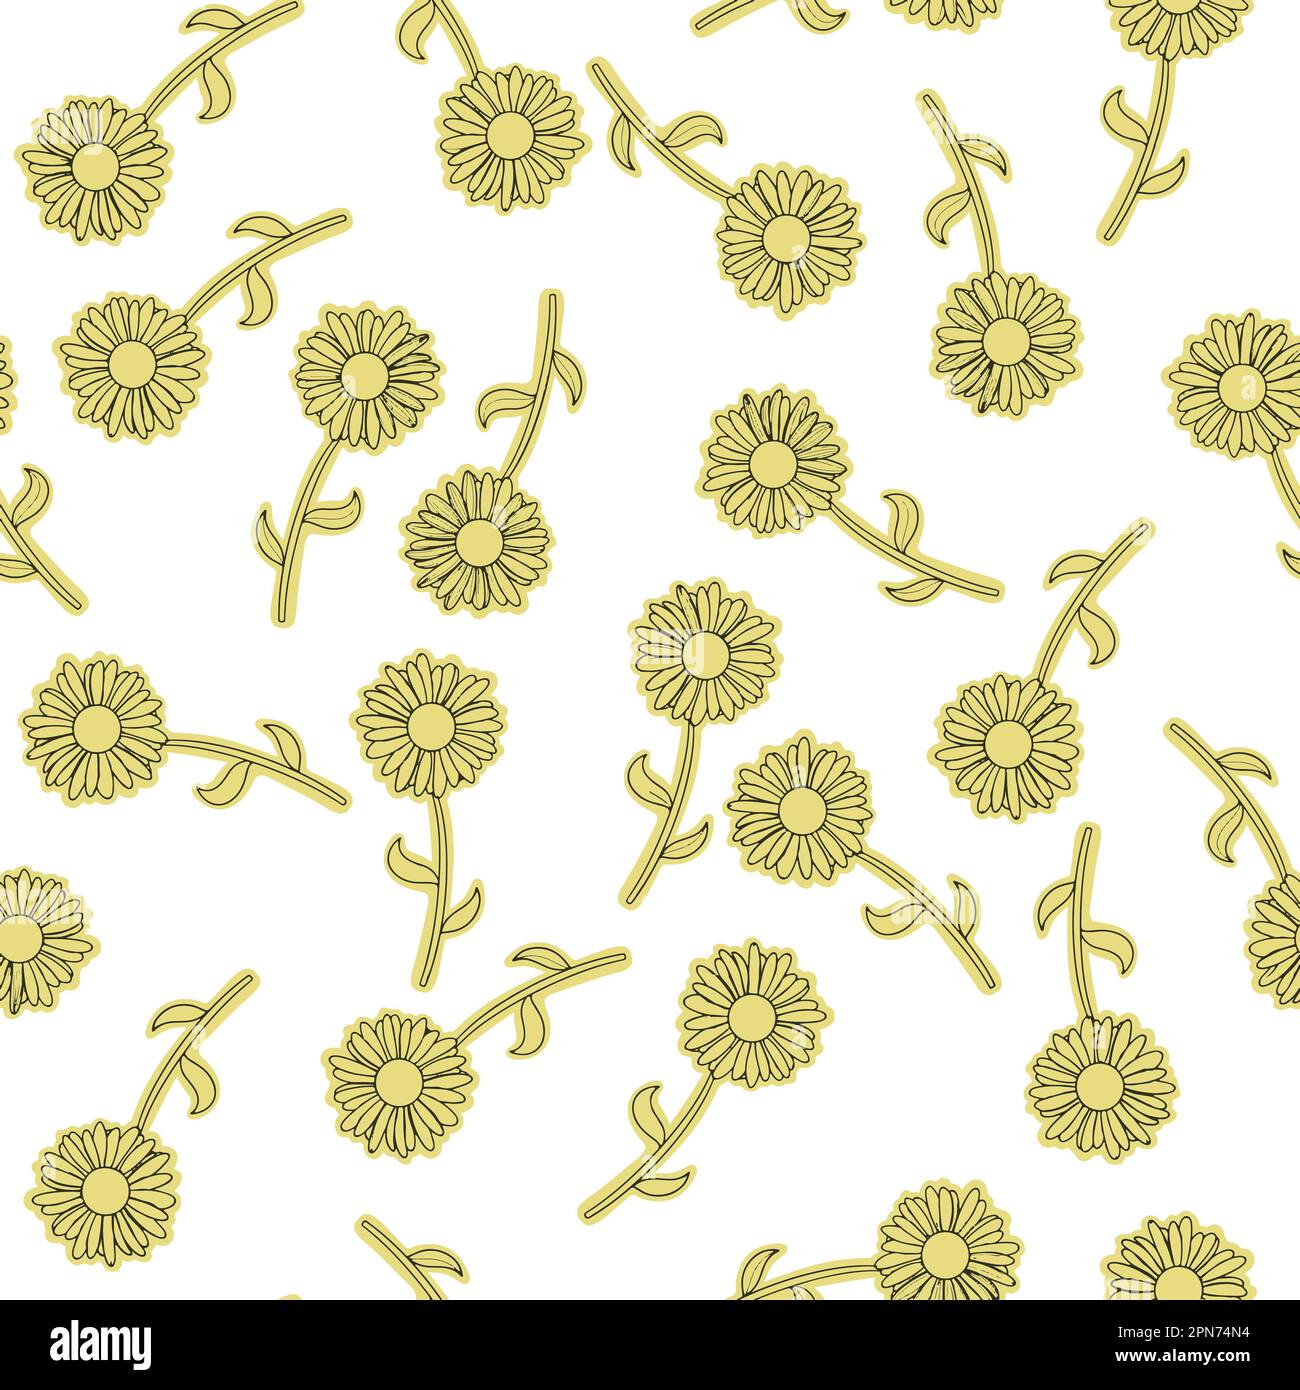 Yellow daisy flower vector pattern. It is a versatile illustration designed for multiple use cases. Usable for textile or stationery products. Stock Vector